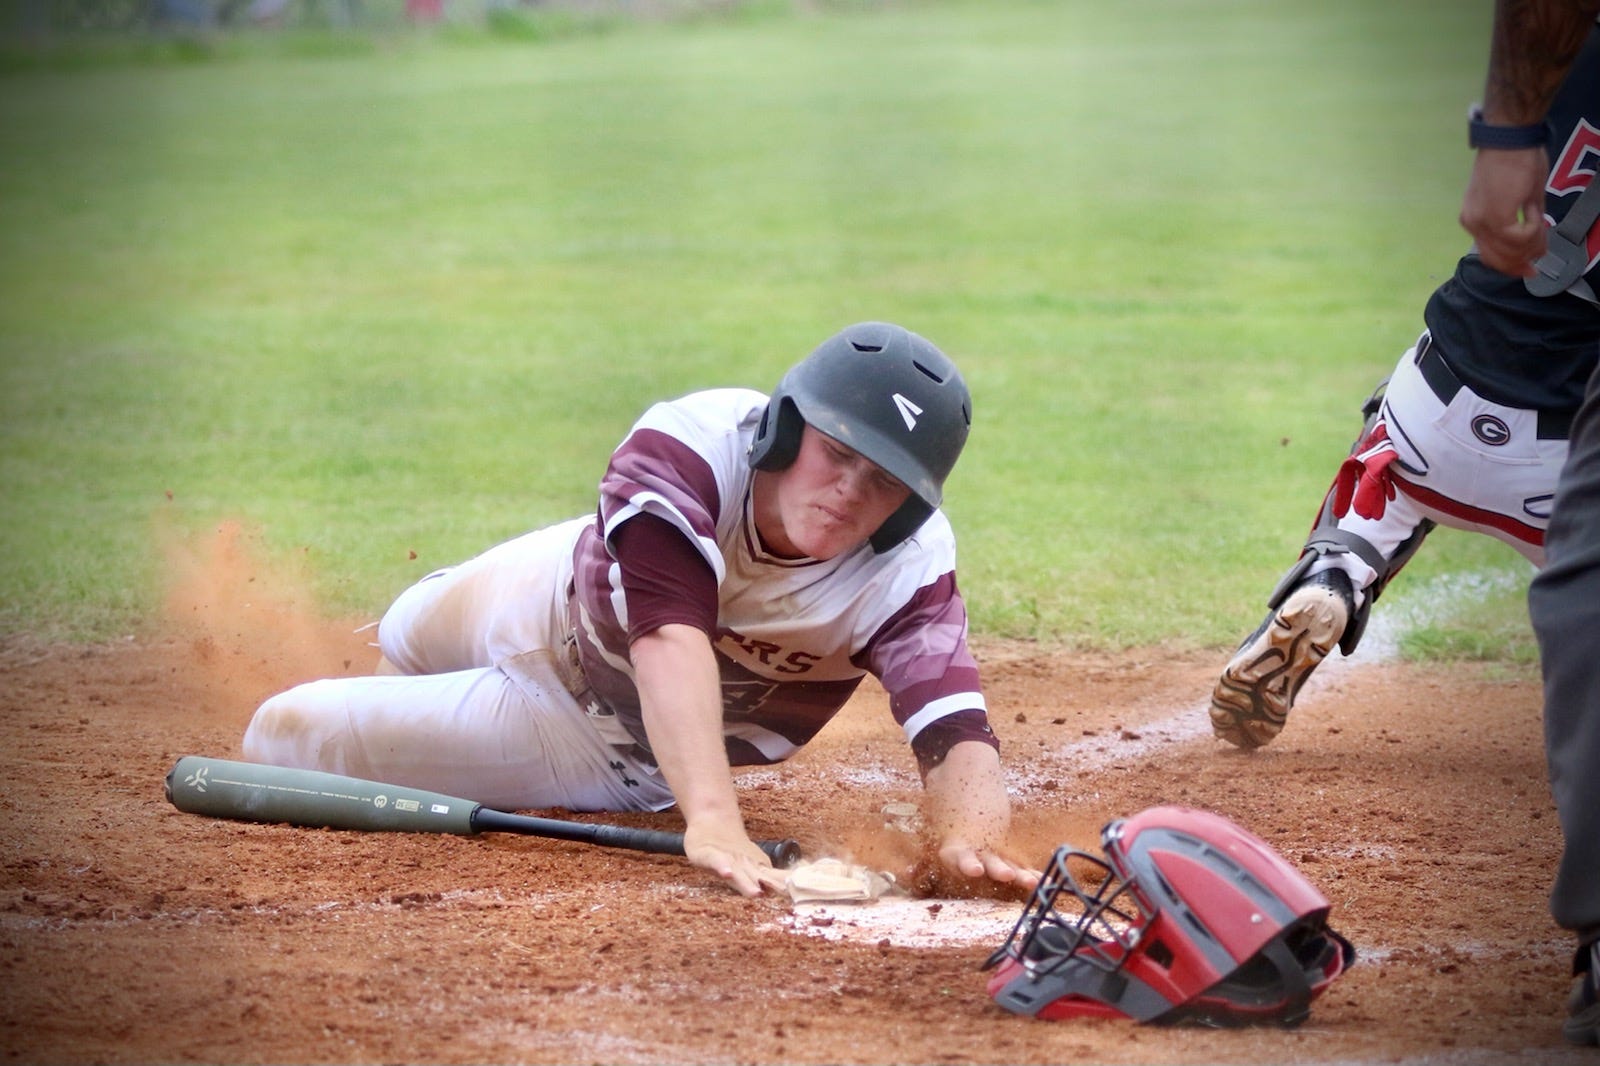 Merryville's Causey Owen slides in safely across home during a game earlier this season. Owen was named the District 4-1A Most Valuable Player this season after batting .576 with 19 RBIs.